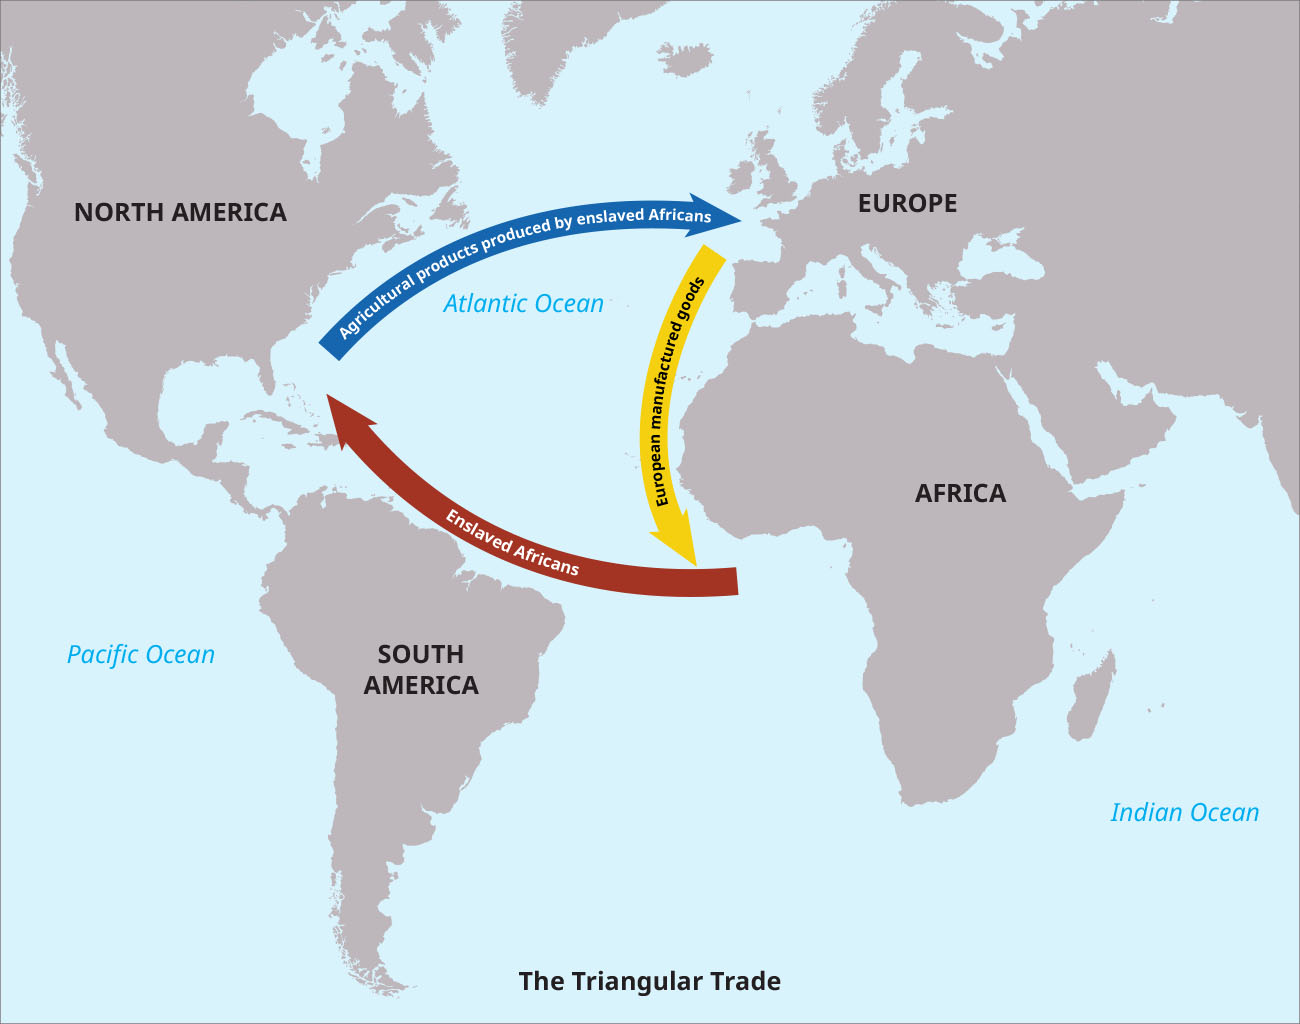 A map of the world is shown with North America, South America, Europe, Africa, the Pacific Ocean, the Atlantic Ocean, and the Indian Ocean labeled. The map is titled, “The Triangular Trade.” A yellow arrow points from the western portion of Europe to West Africa. It is labeled: European manufactured goods. A red arrow points from West Africa to the southeastern portion of North America. It is labeled: Enslaved Africans. A blue arrow points from the southeastern area of North American back to the western portion of Europe, labelled: Agricultural products produced by enslaved Africans.